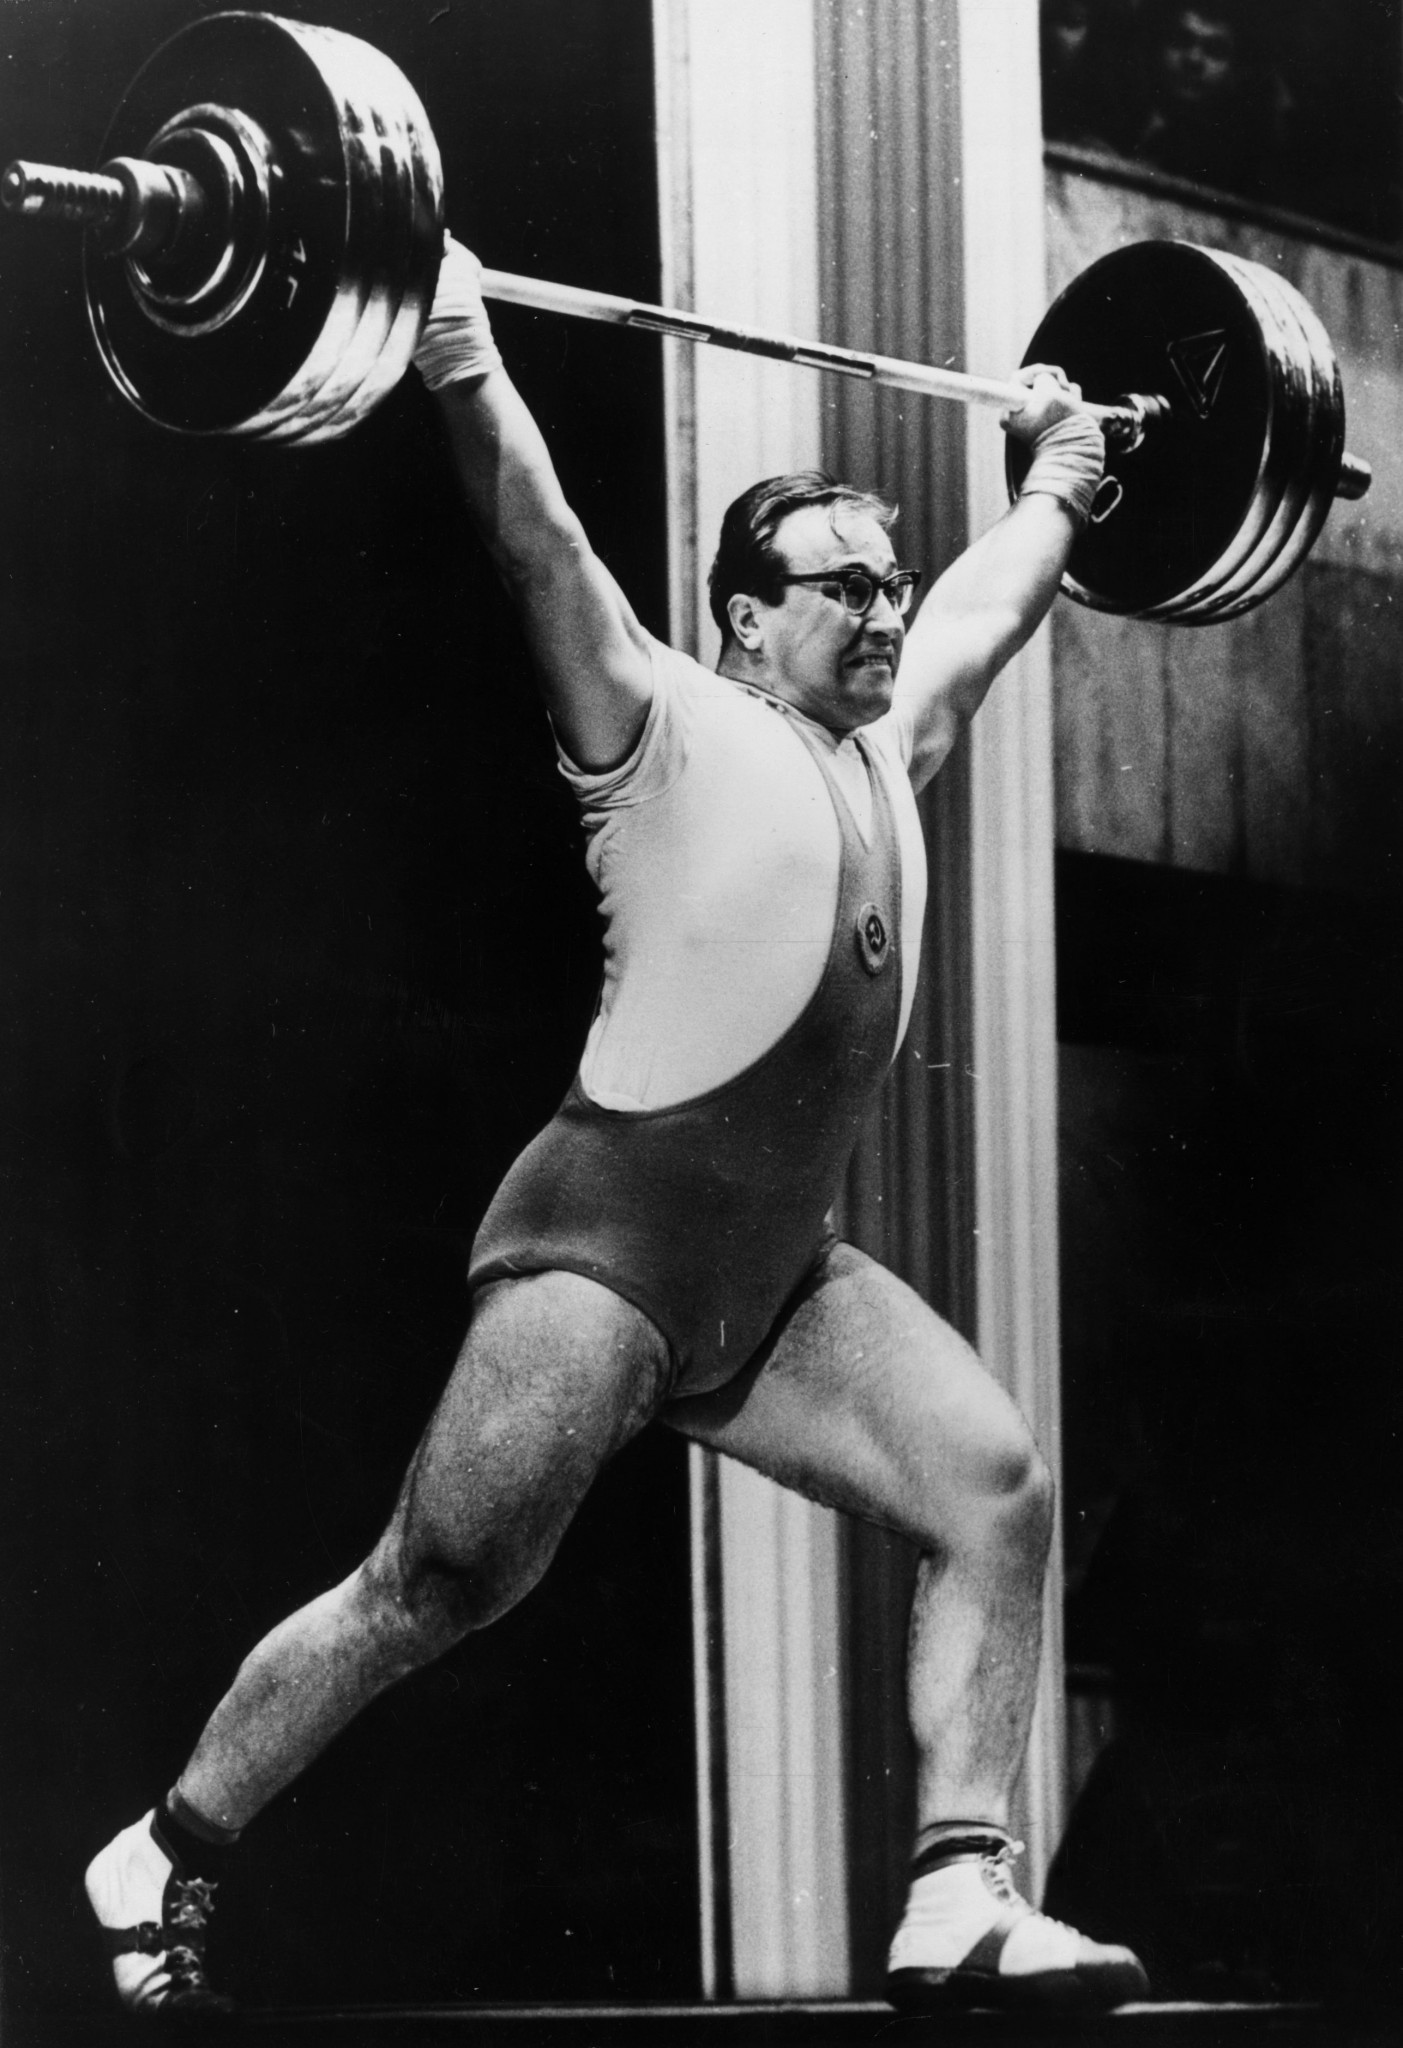 Russian heavyweight weightlifter Yuri Vlasov in action during the World Championships in September 1962 which he won to achieve the official title of strongest man in the world ©Getty Images